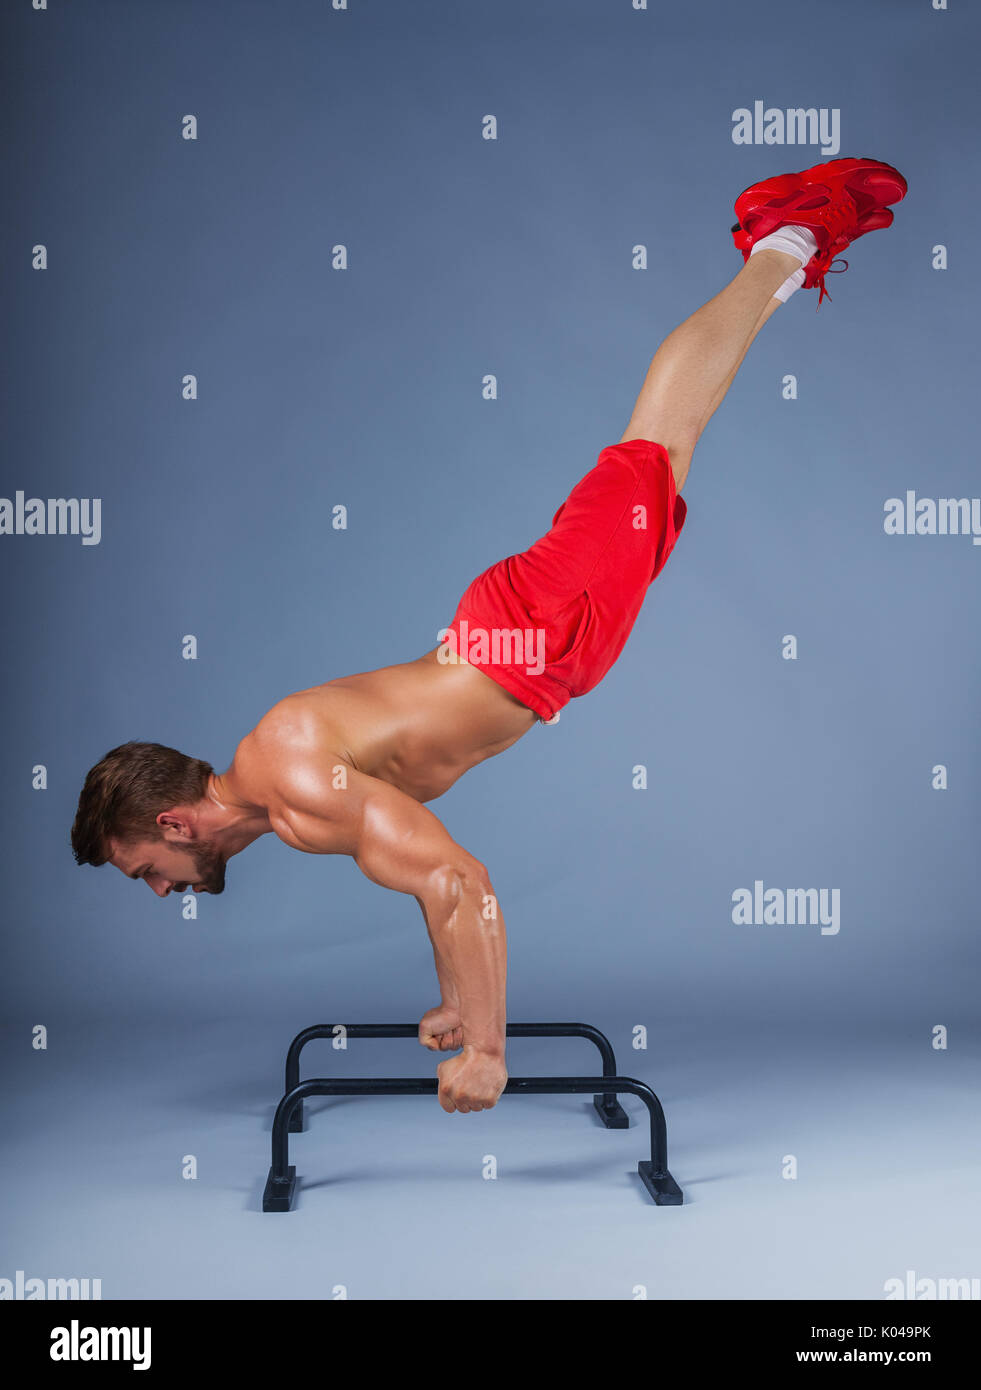 Strong male athlete shows calisthenic moves extended legs planche push ups on parallel bars,  studio shot Stock Photo